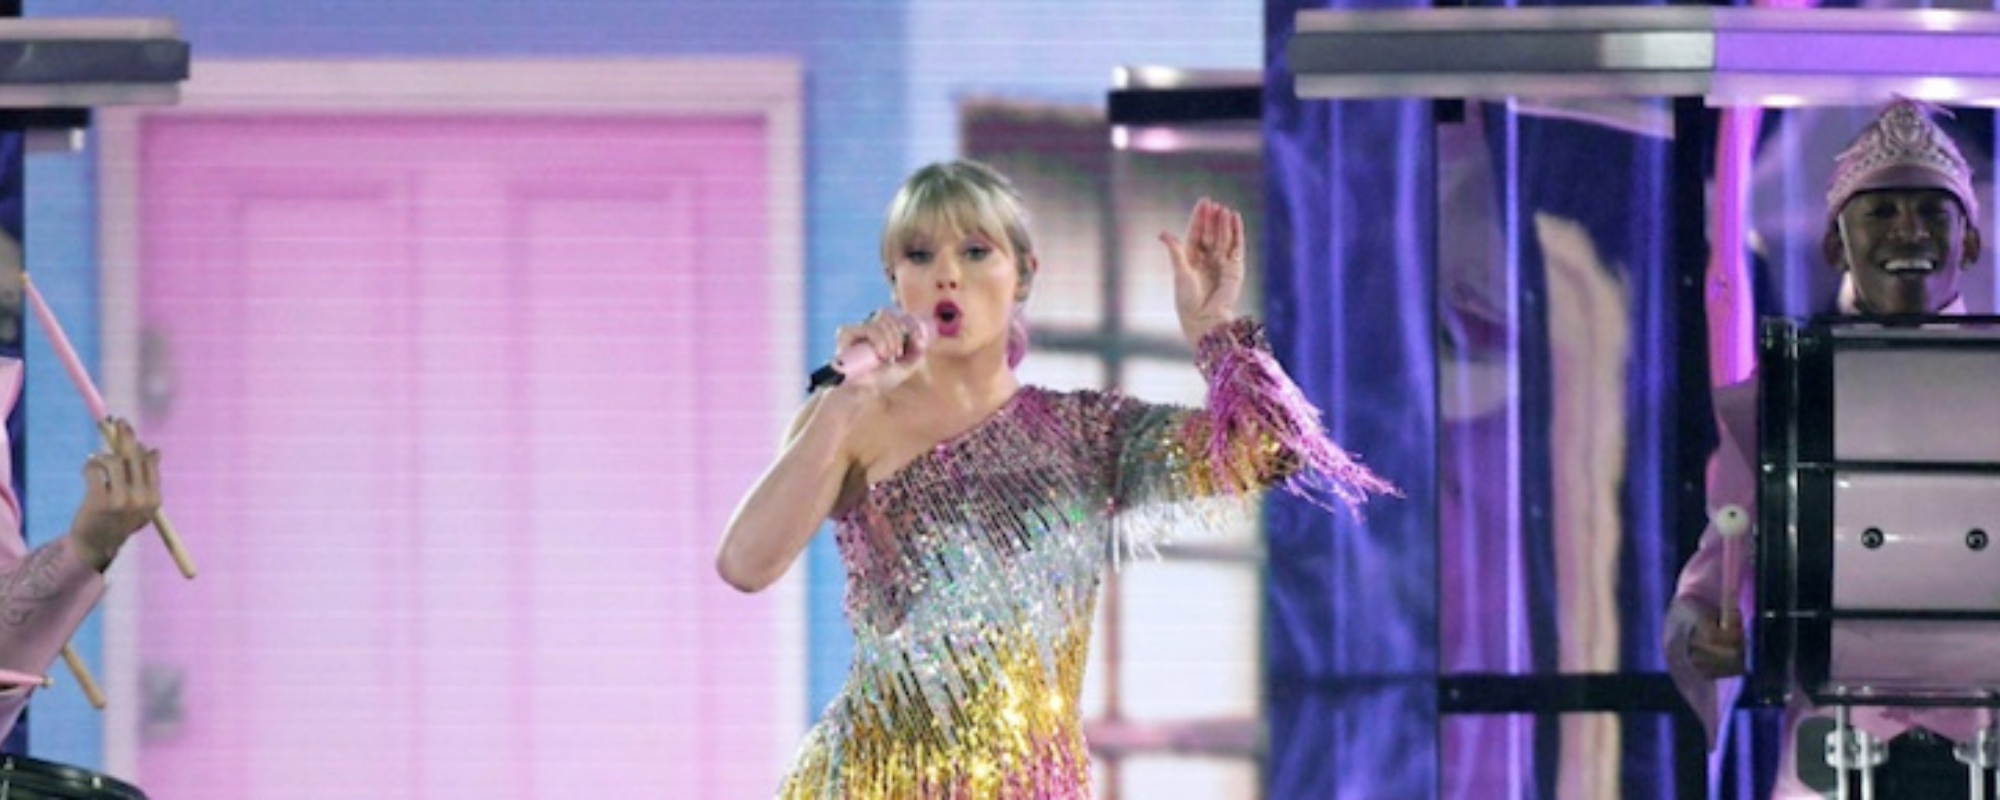 2023 Billboard Music Awards: Taylor Swift Dominates with 20 Nominations